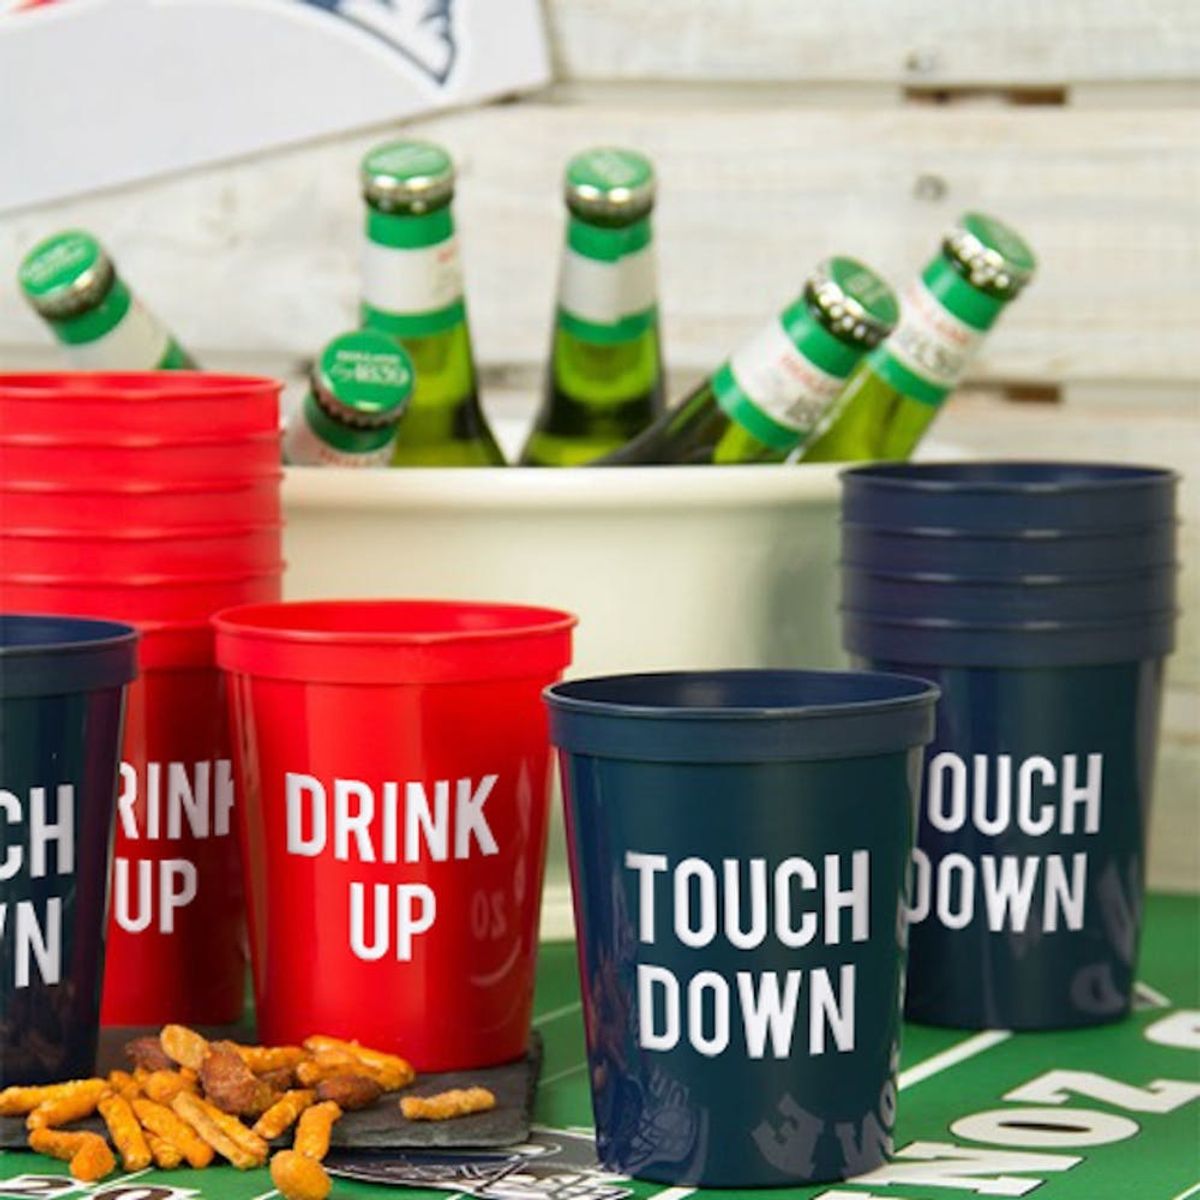 5 Things You Didn’t Know You Needed for Your Super Bowl Party